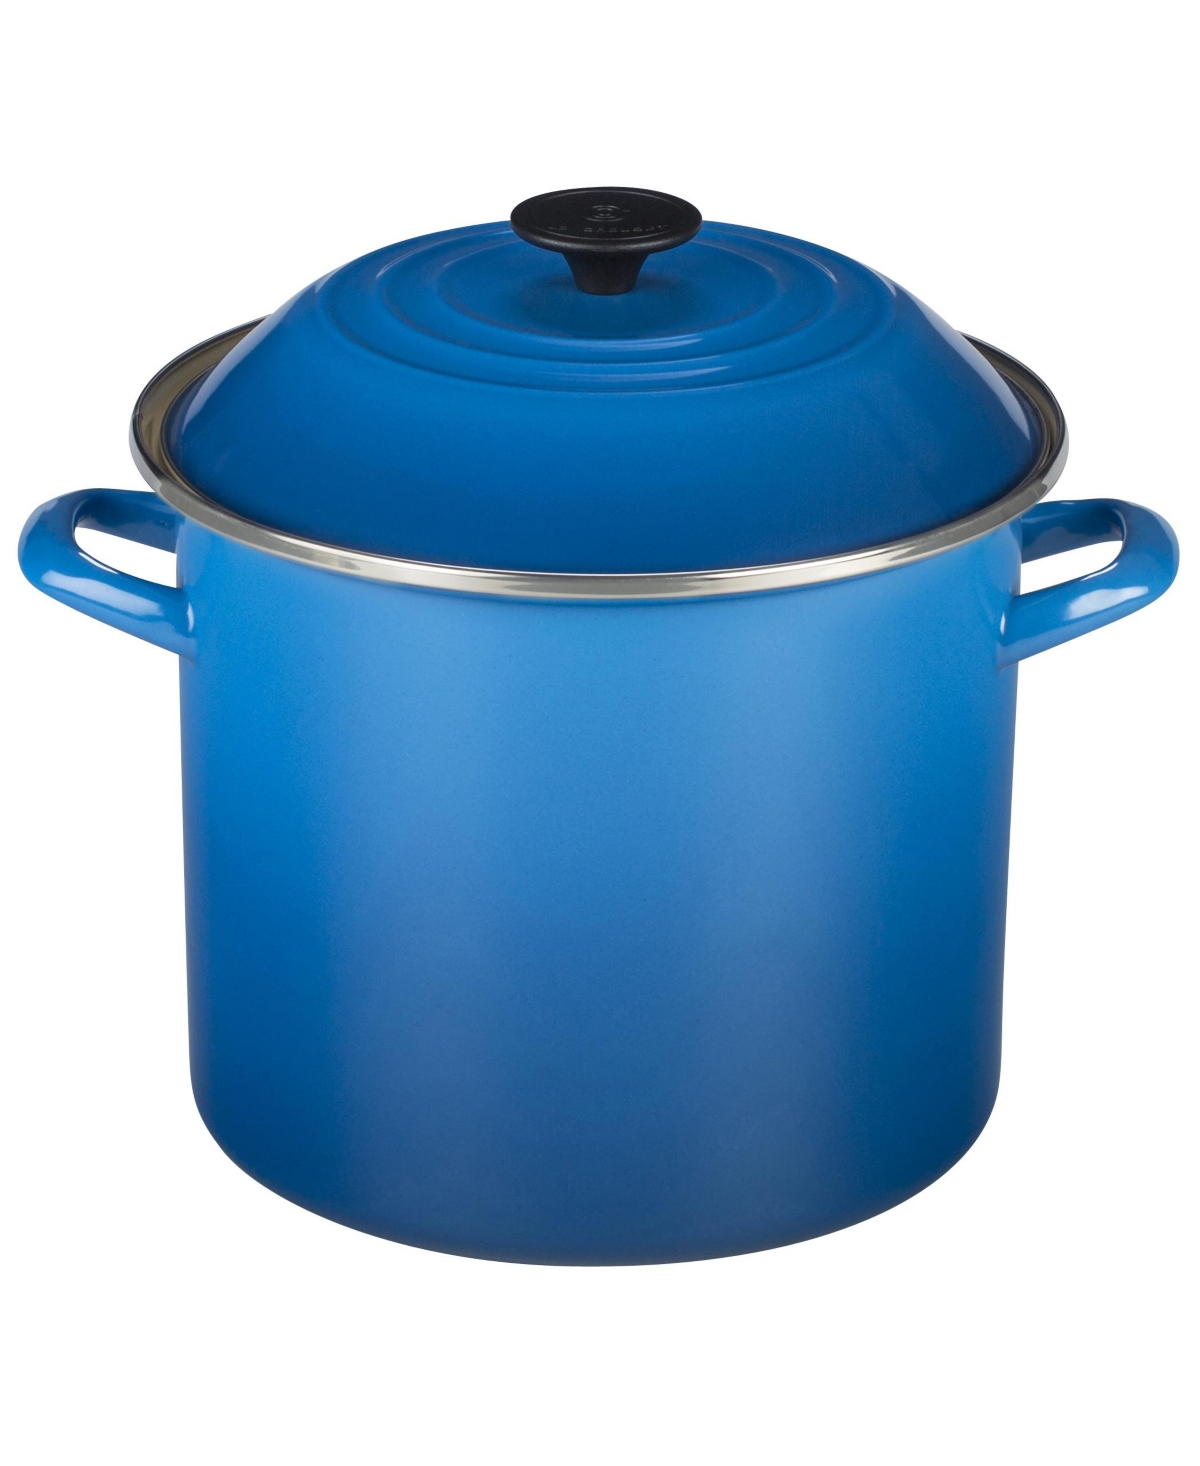 Le Creuset 10 Quart Enamel On Steel Stock Pot With Lid In Marseille